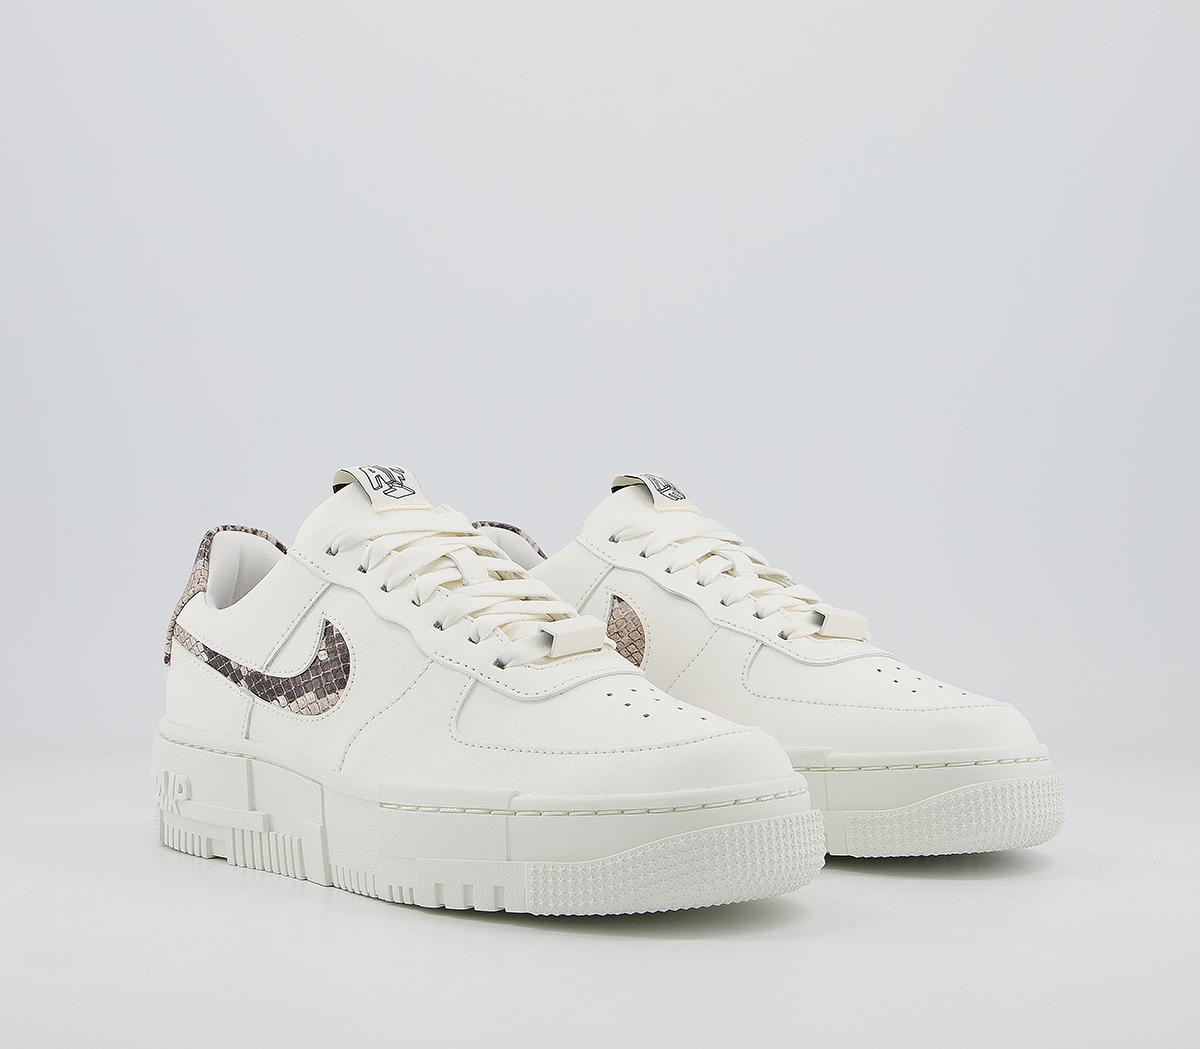 Nike Air Force 1 Pixel Trainers Sail Desert Sand Leopard White - Hers ...